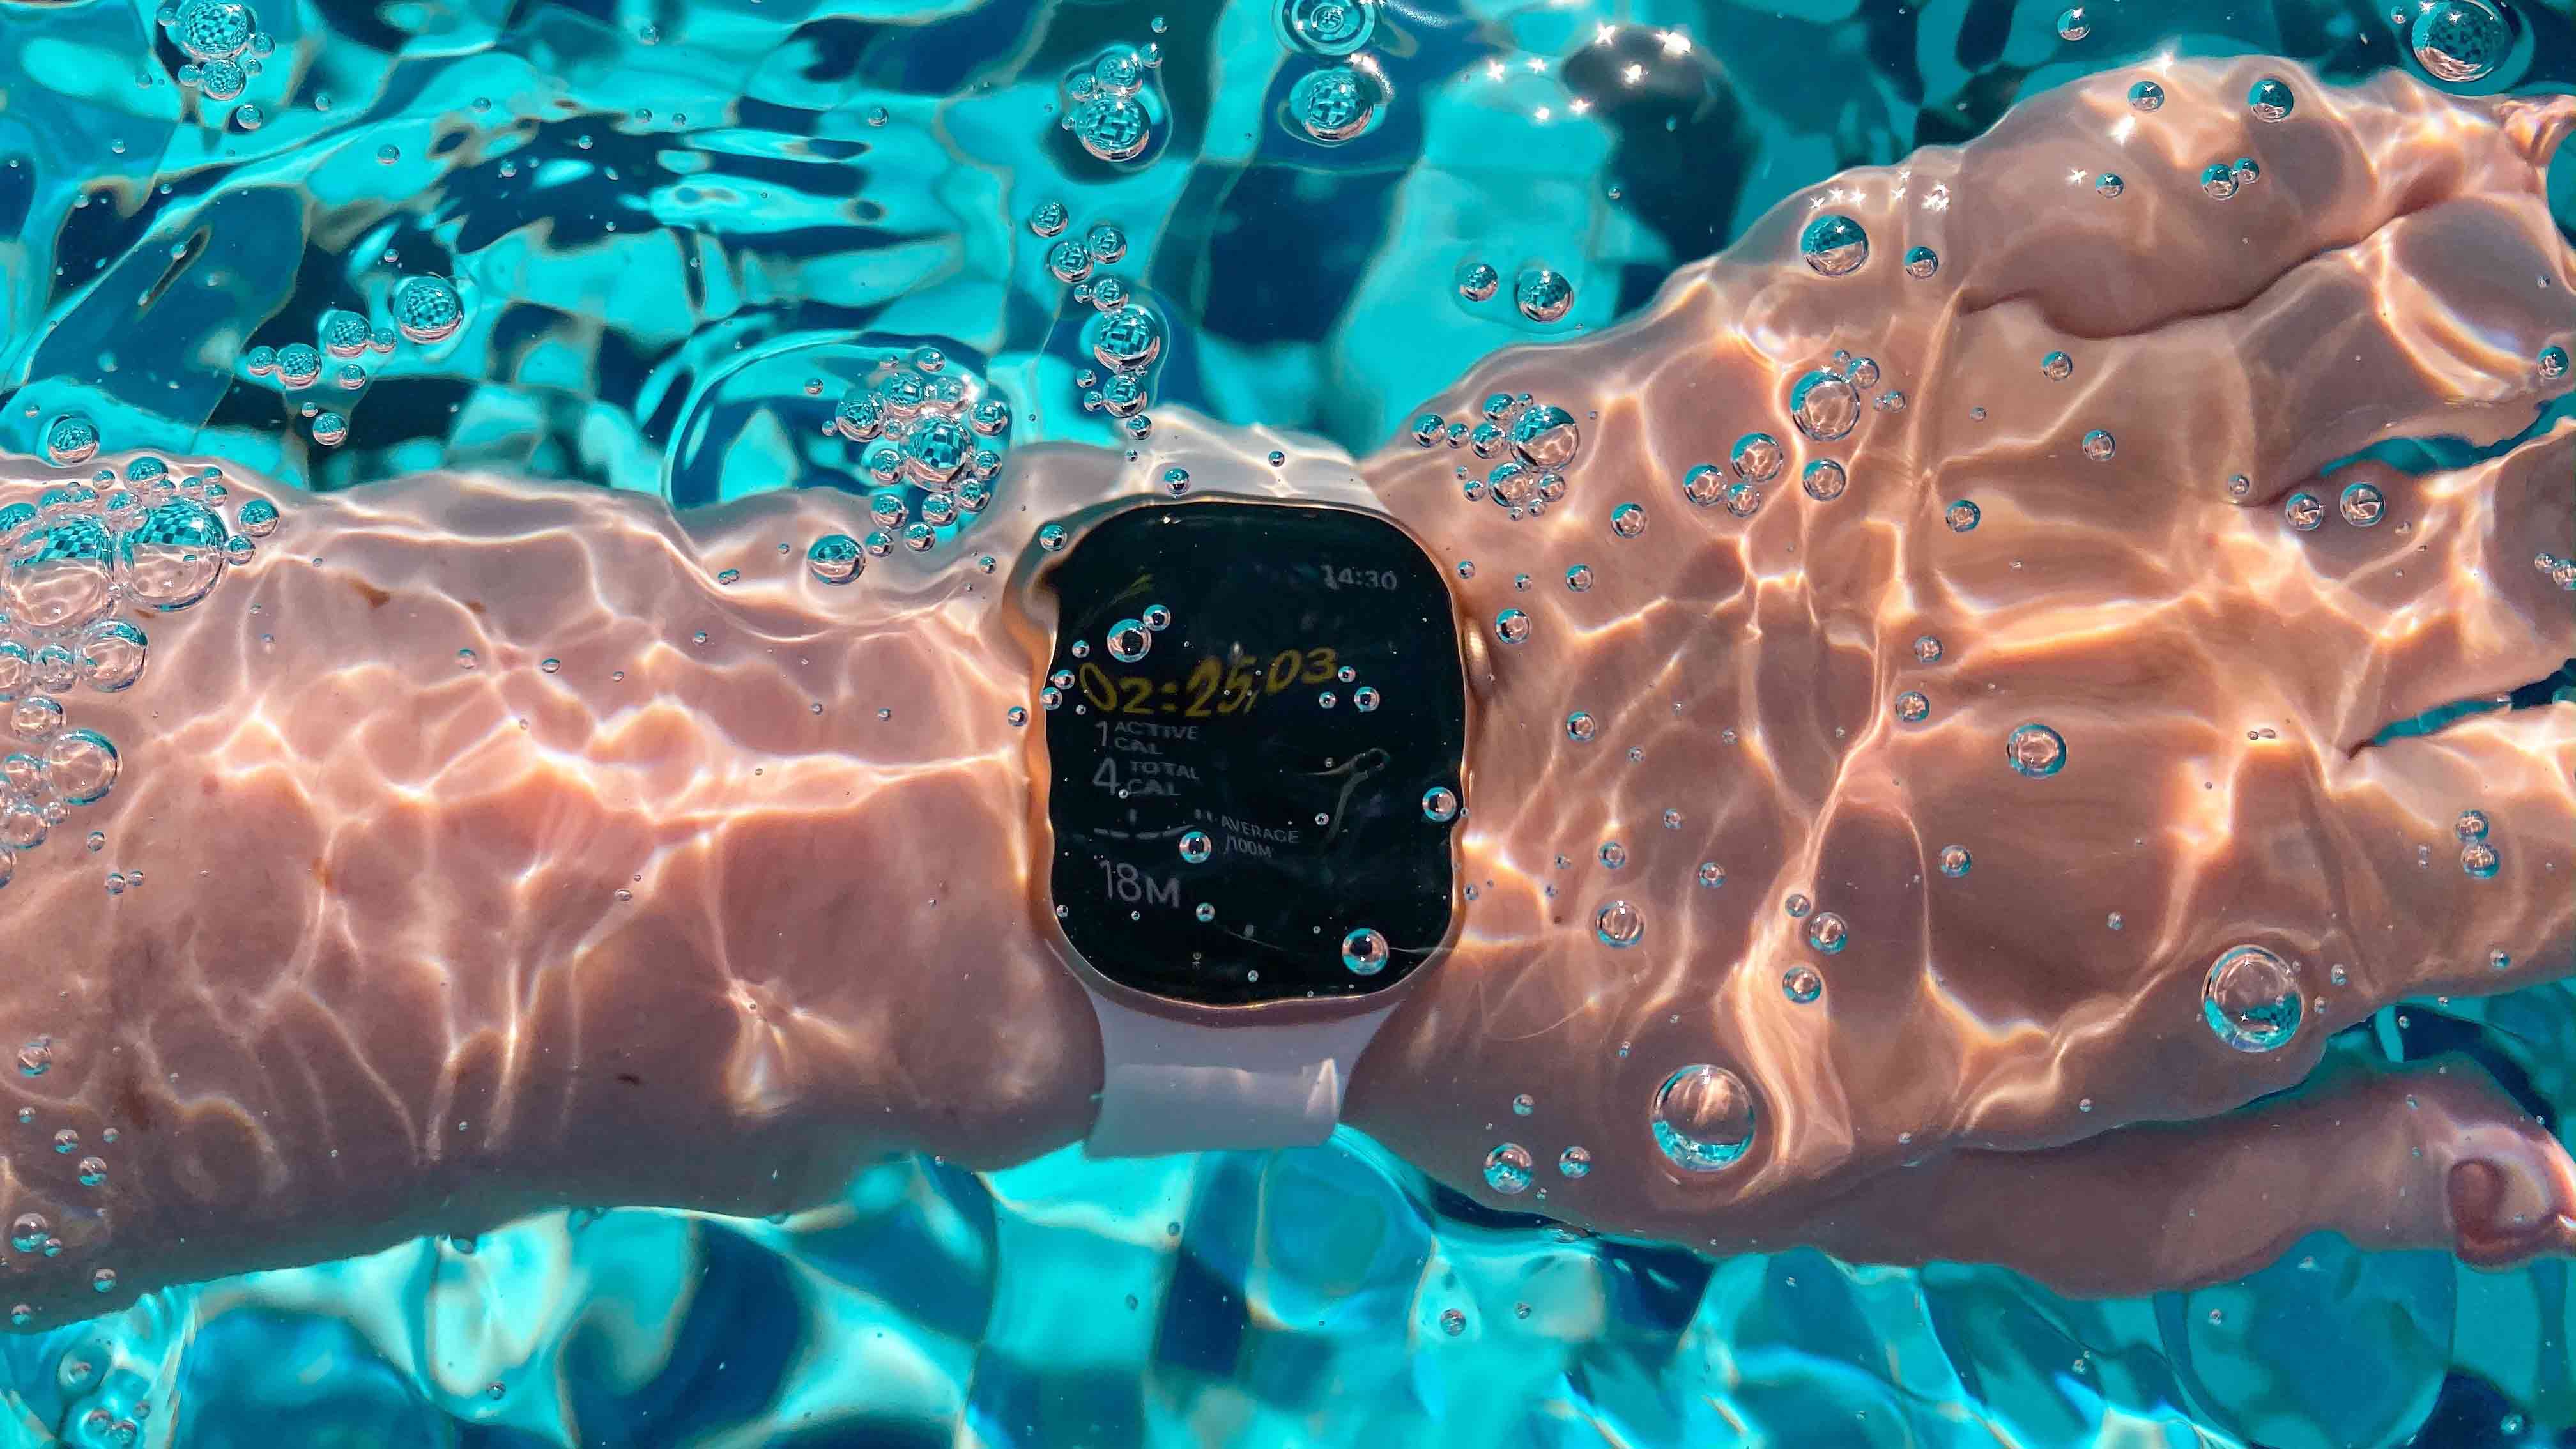 Apple watch submerged in water